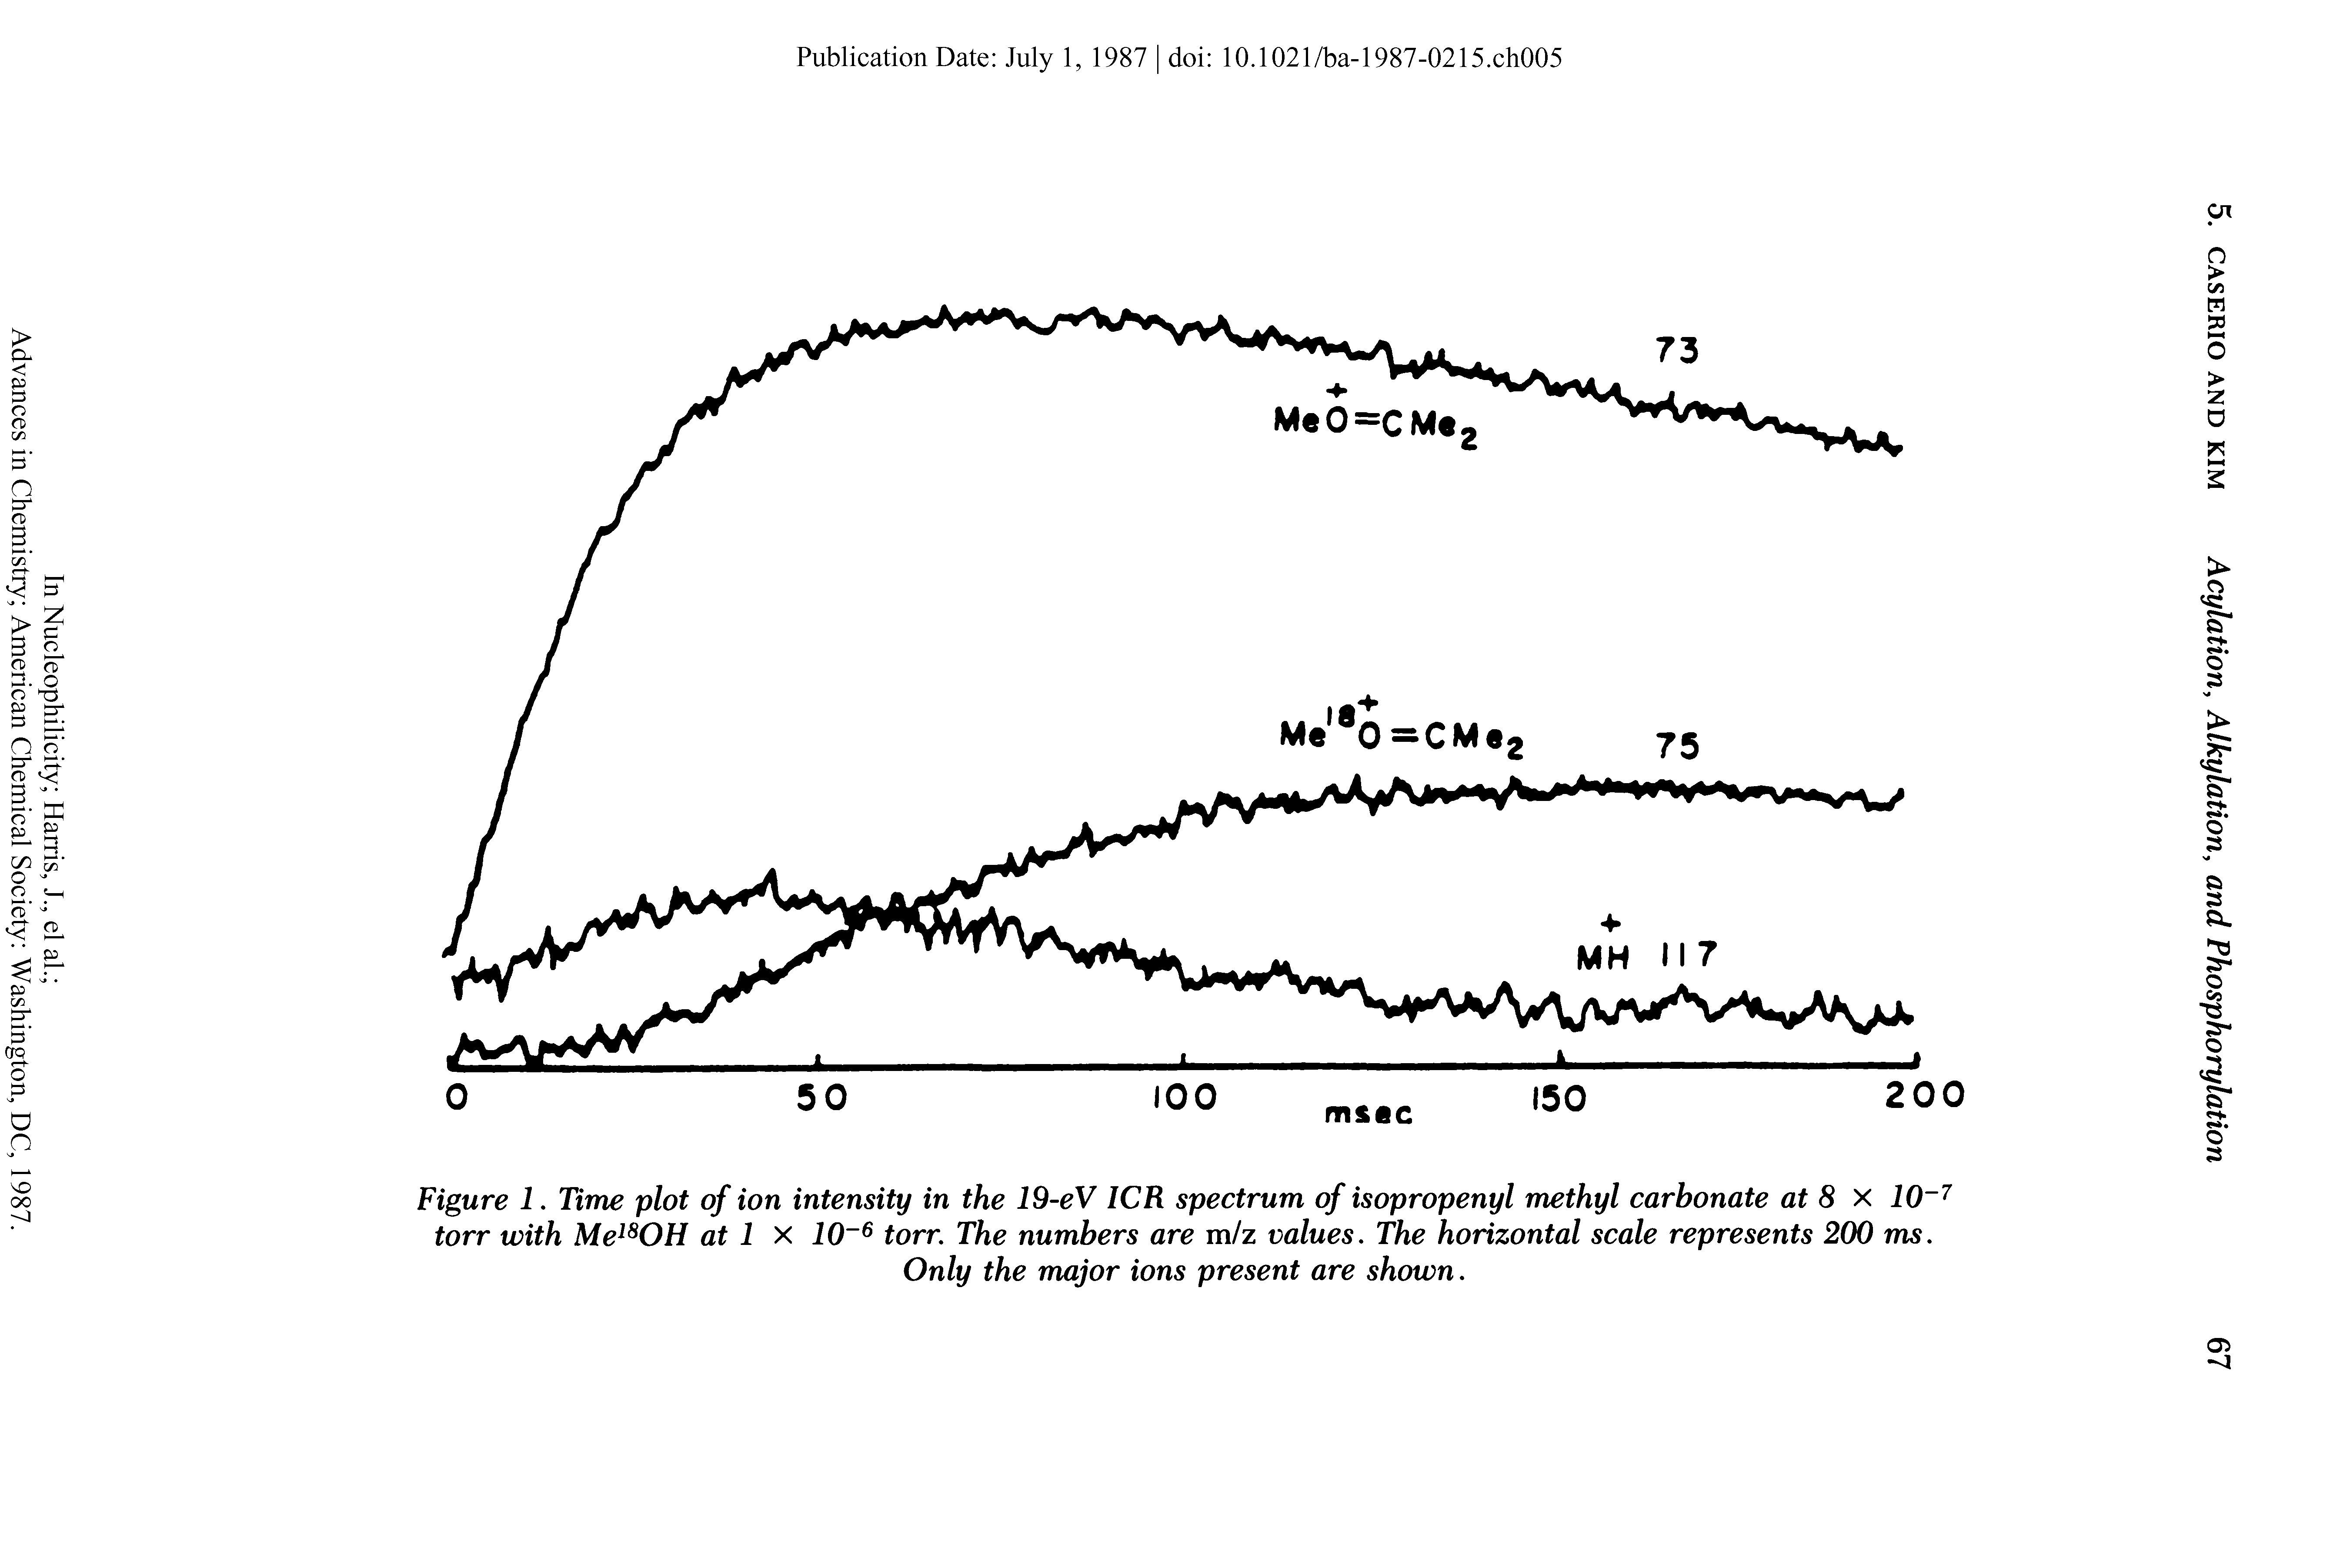 Figure 1. Time plot of ion intensity in the 19-eV ICR spectrum of isopropenyl methyl carbonate at 8 x 10 7 torr with Me18OH at 1 x 10 6 torr. The numbers are m/z values. The horizontal scale represents 200 ms.